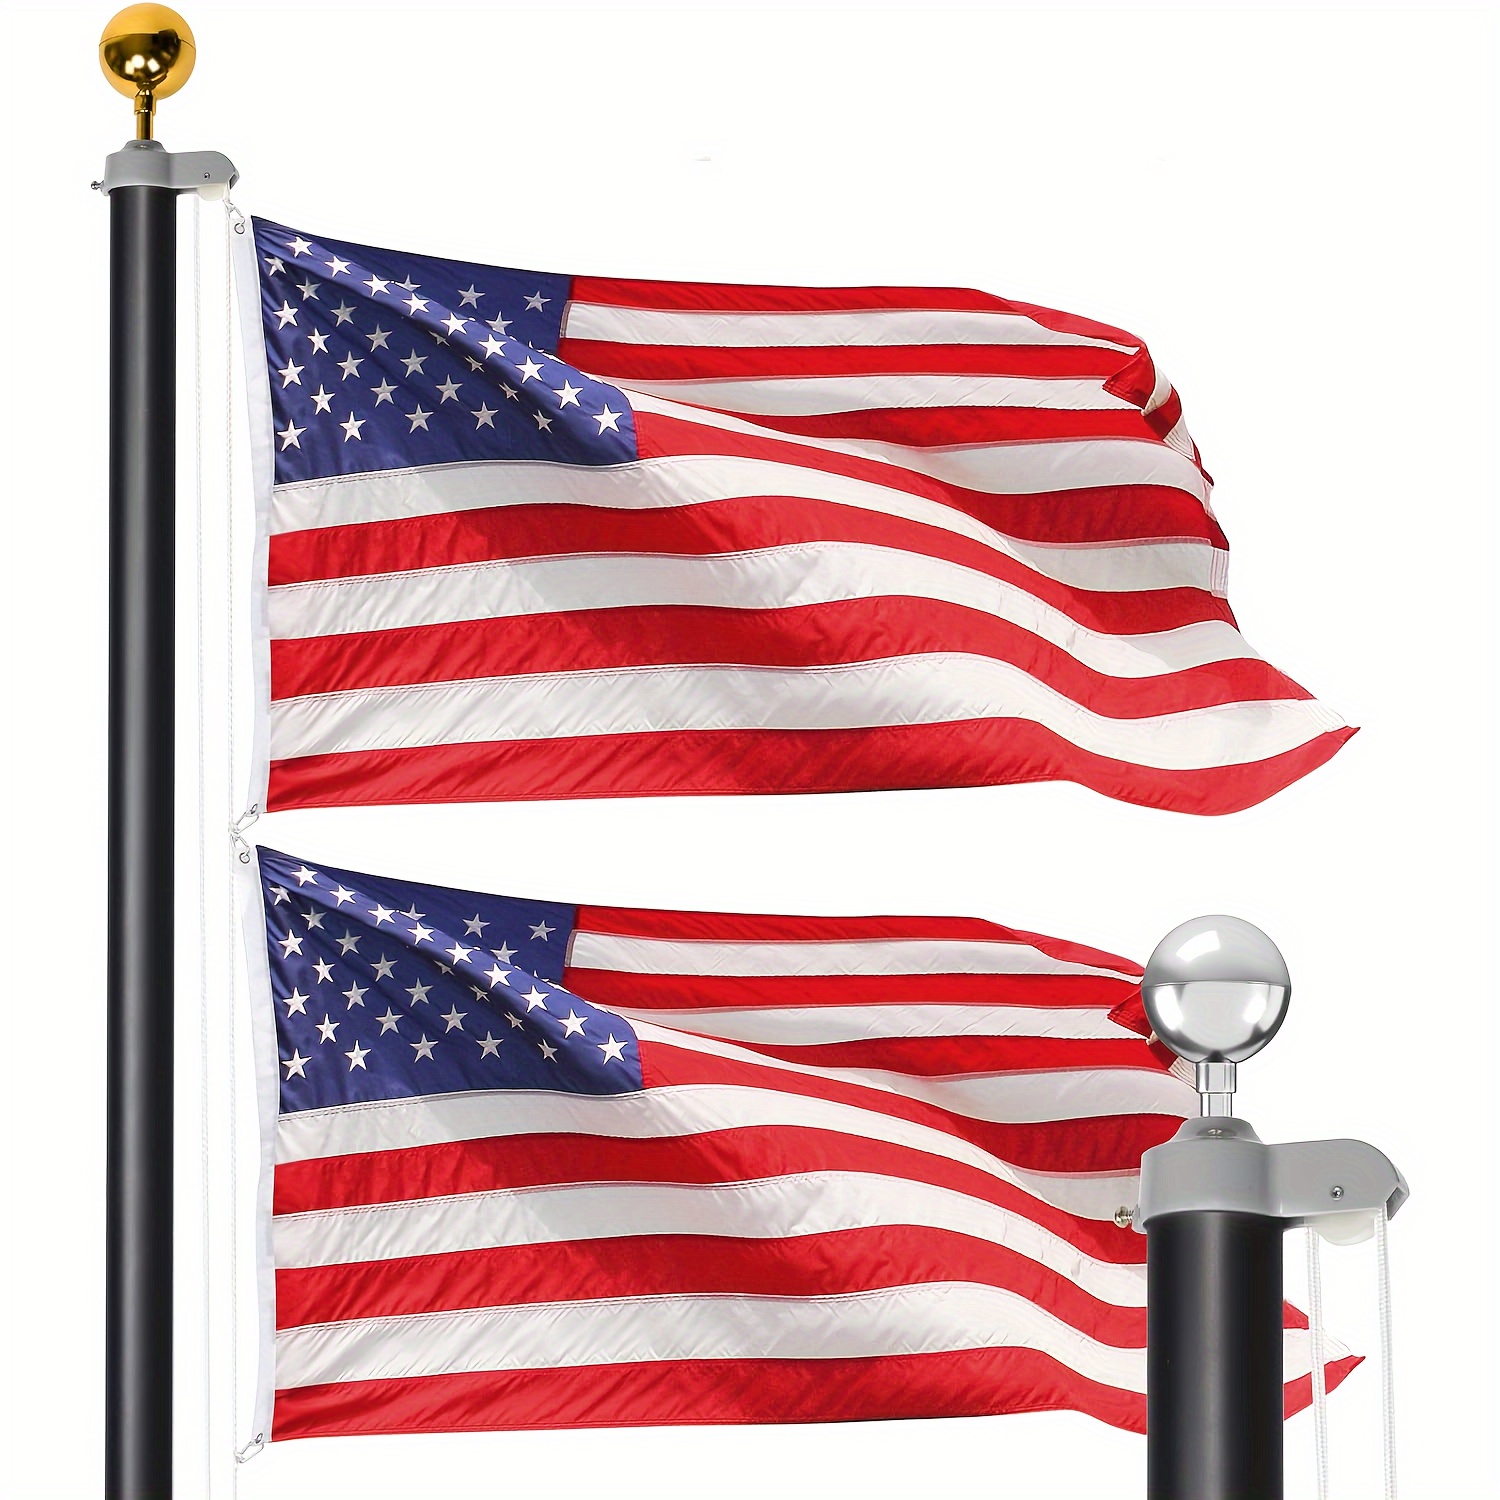 

Flagpole Kit - Heavy Duty Residential Flagpole - Segmented Outdoor Buried Thick Adjustable Height Aluminum Pole Outdoor Commercial, Random Gold And Silver Balls, 3x5 American Flag